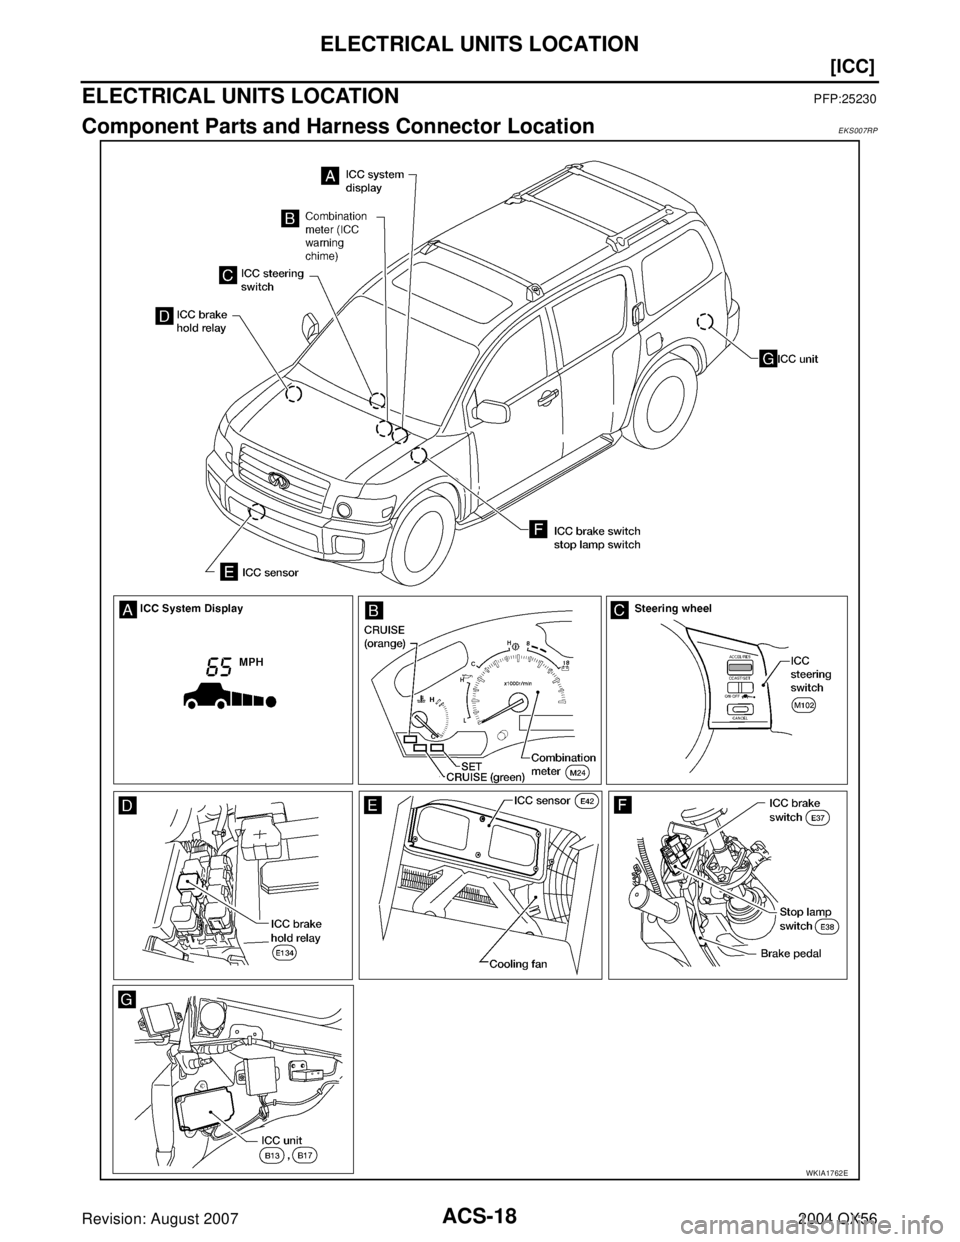 INFINITI QX56 2004  Factory Owners Manual ACS-18
[ICC]
ELECTRICAL UNITS LOCATION
Revision: August 20072004 QX56
ELECTRICAL UNITS LOCATIONPFP:25230
Component Parts and Harness Connector LocationEKS007RP
WKIA1762E 